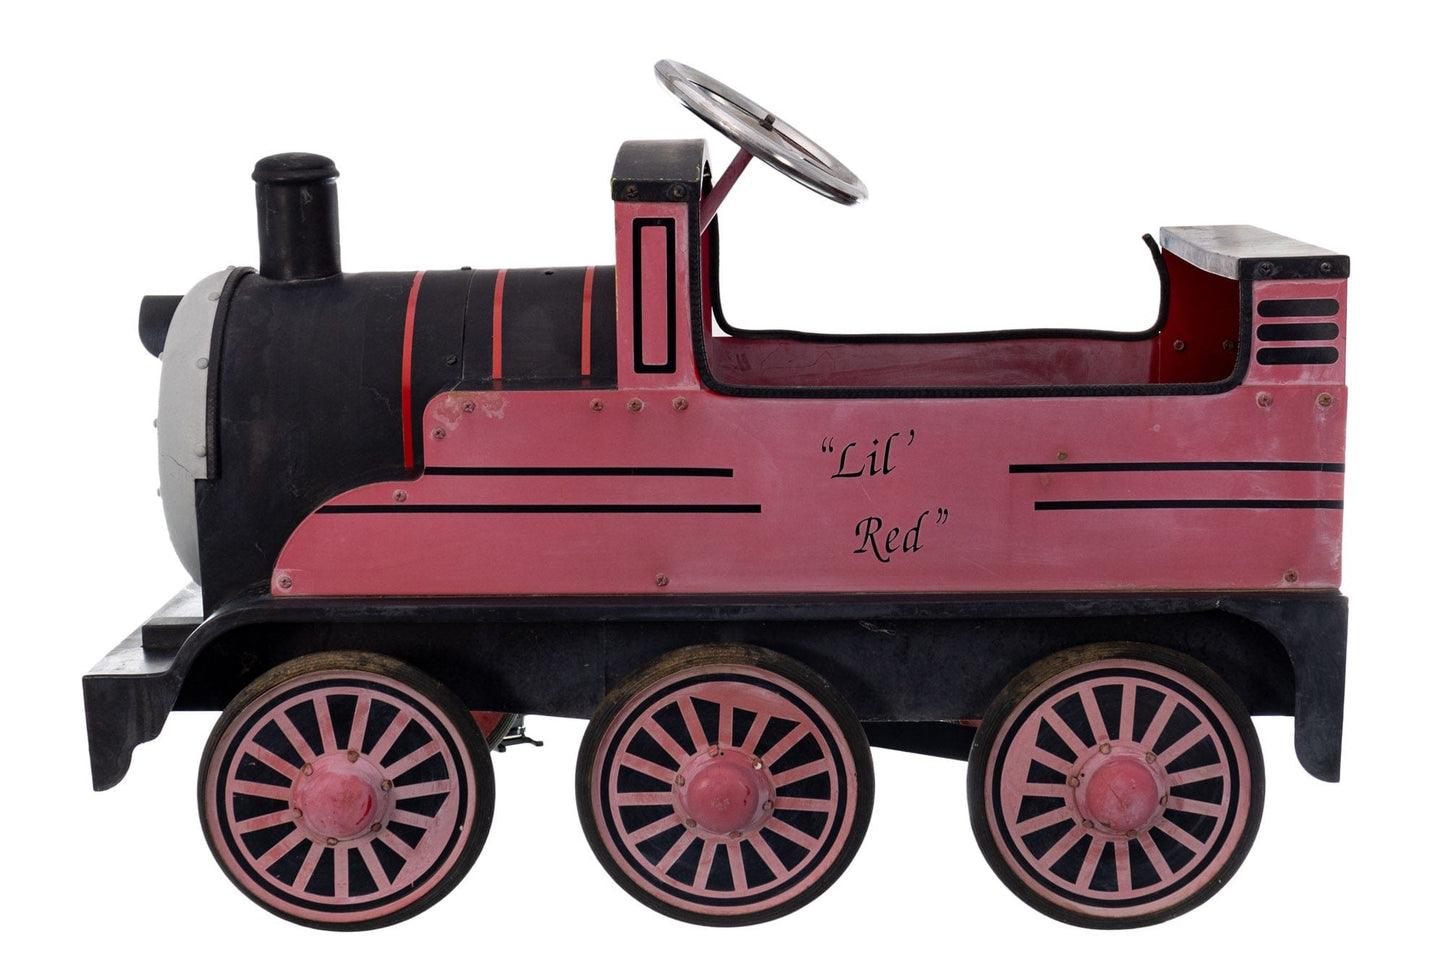 Antique Toy; Lil Red Train Text